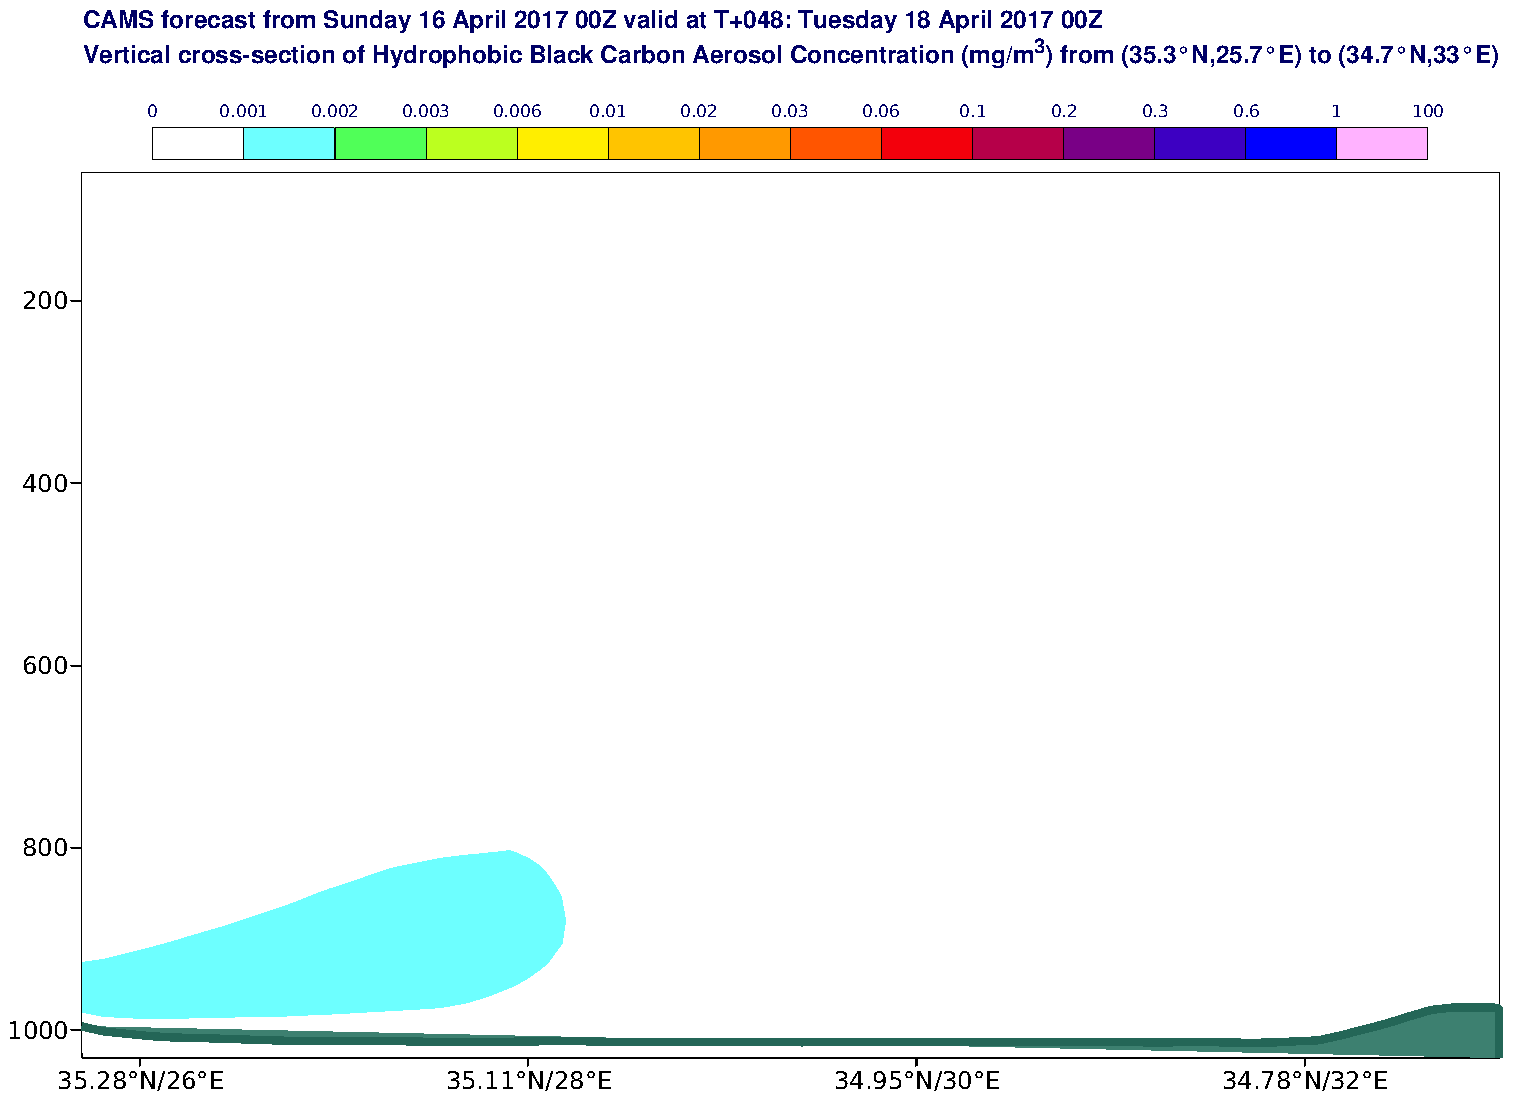 Vertical cross-section of Hydrophobic Black Carbon Aerosol Concentration (mg/m3) valid at T48 - 2017-04-18 00:00